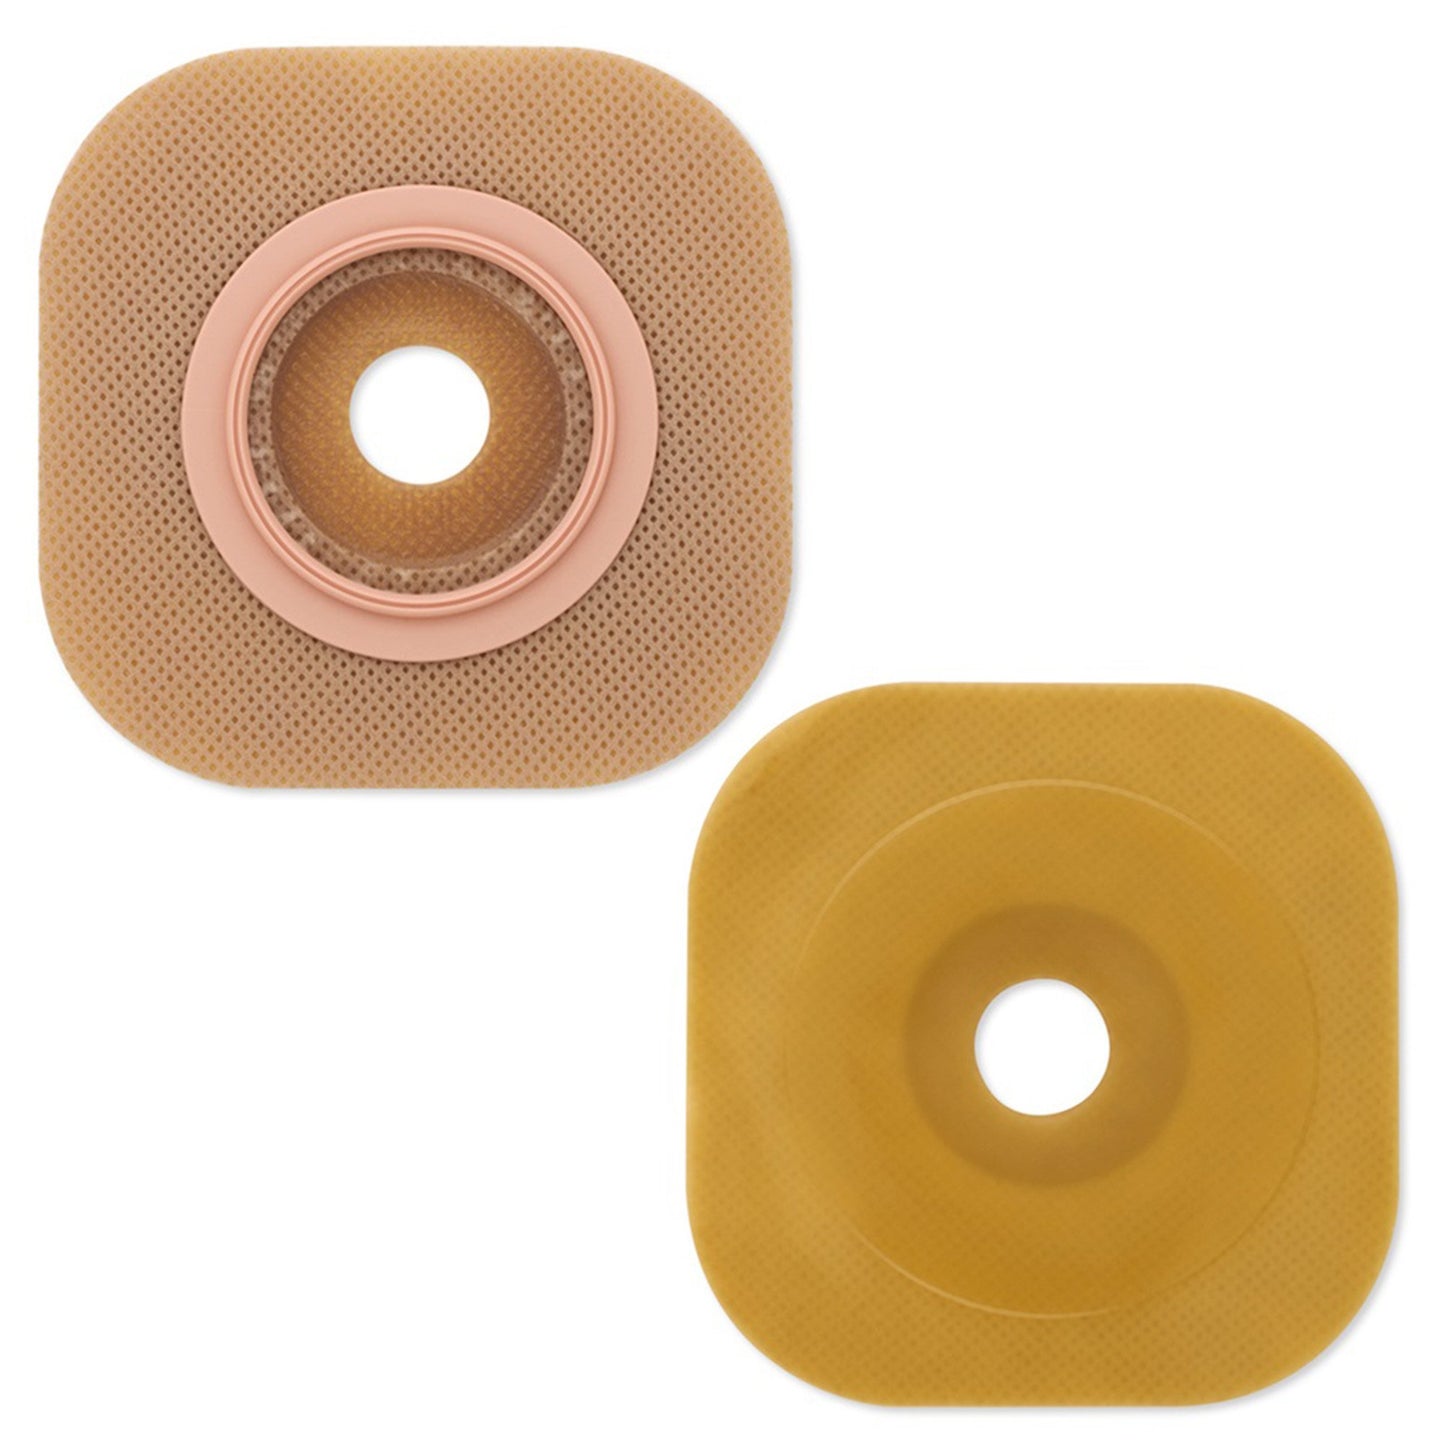 New Image™ FlexWear™ Colostomy Barrier With 1.5 Inch Stoma Opening, 5 ct